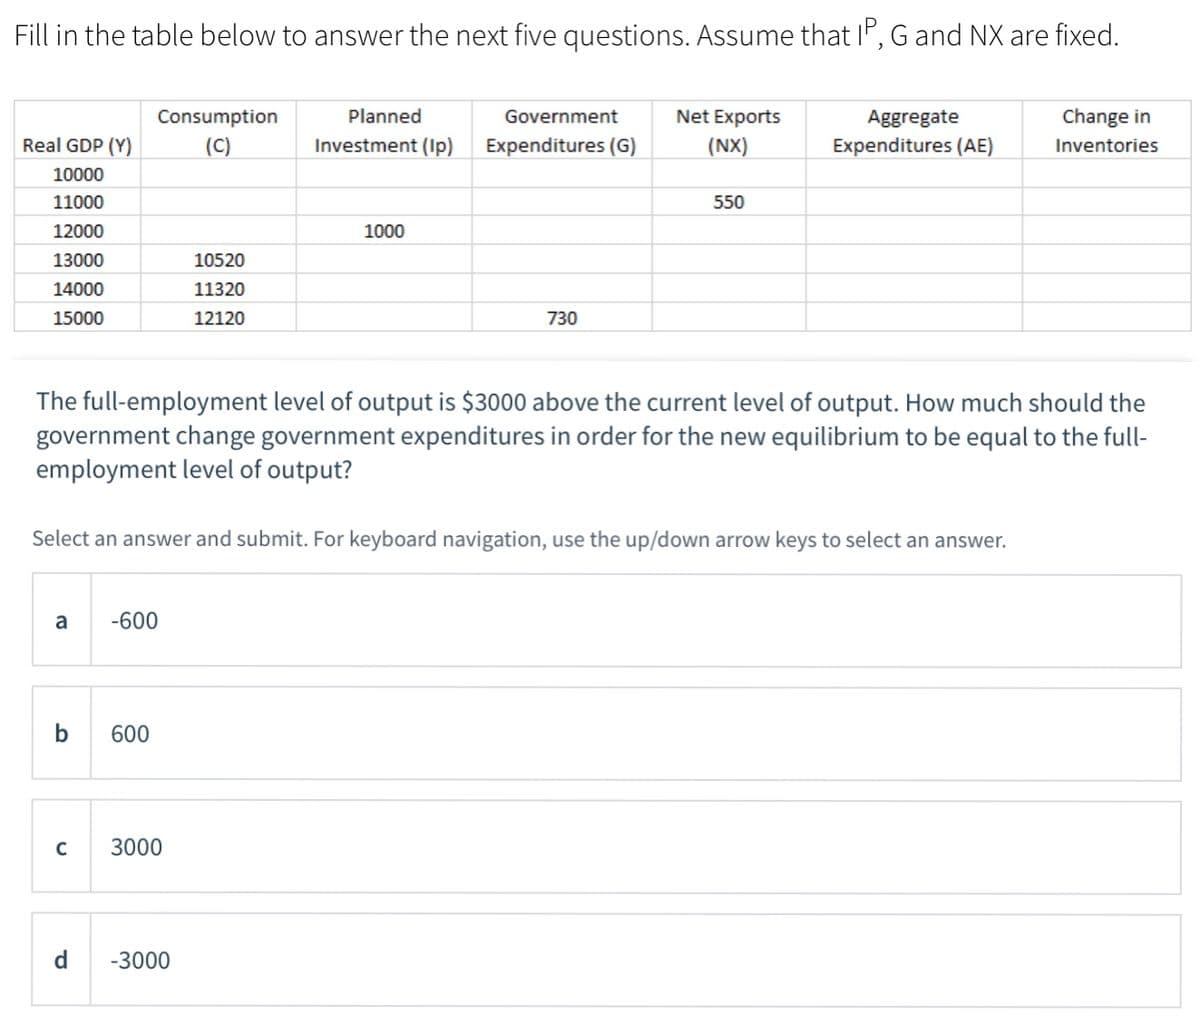 Fill in the table below to answer the next five questions. Assume that l", G and NX are fixed.
Consumption
Planned
Government
Net Exports
Aggregate
Change in
Real GDP (Y)
(C)
Investment (Ip)
Expenditures (G)
(NX)
Expenditures (AE)
Inventories
10000
11000
550
12000
1000
13000
10520
14000
11320
15000
12120
730
The full-employment level of output is $3000 above the current level of output. How much should the
government change government expenditures in order for the new equilibrium to be equal to the full-
employment level of output?
Select an answer and submit. For keyboard navigation, use the up/down arrow keys to select an answer.
a
-600
b
600
3000
d
-3000
